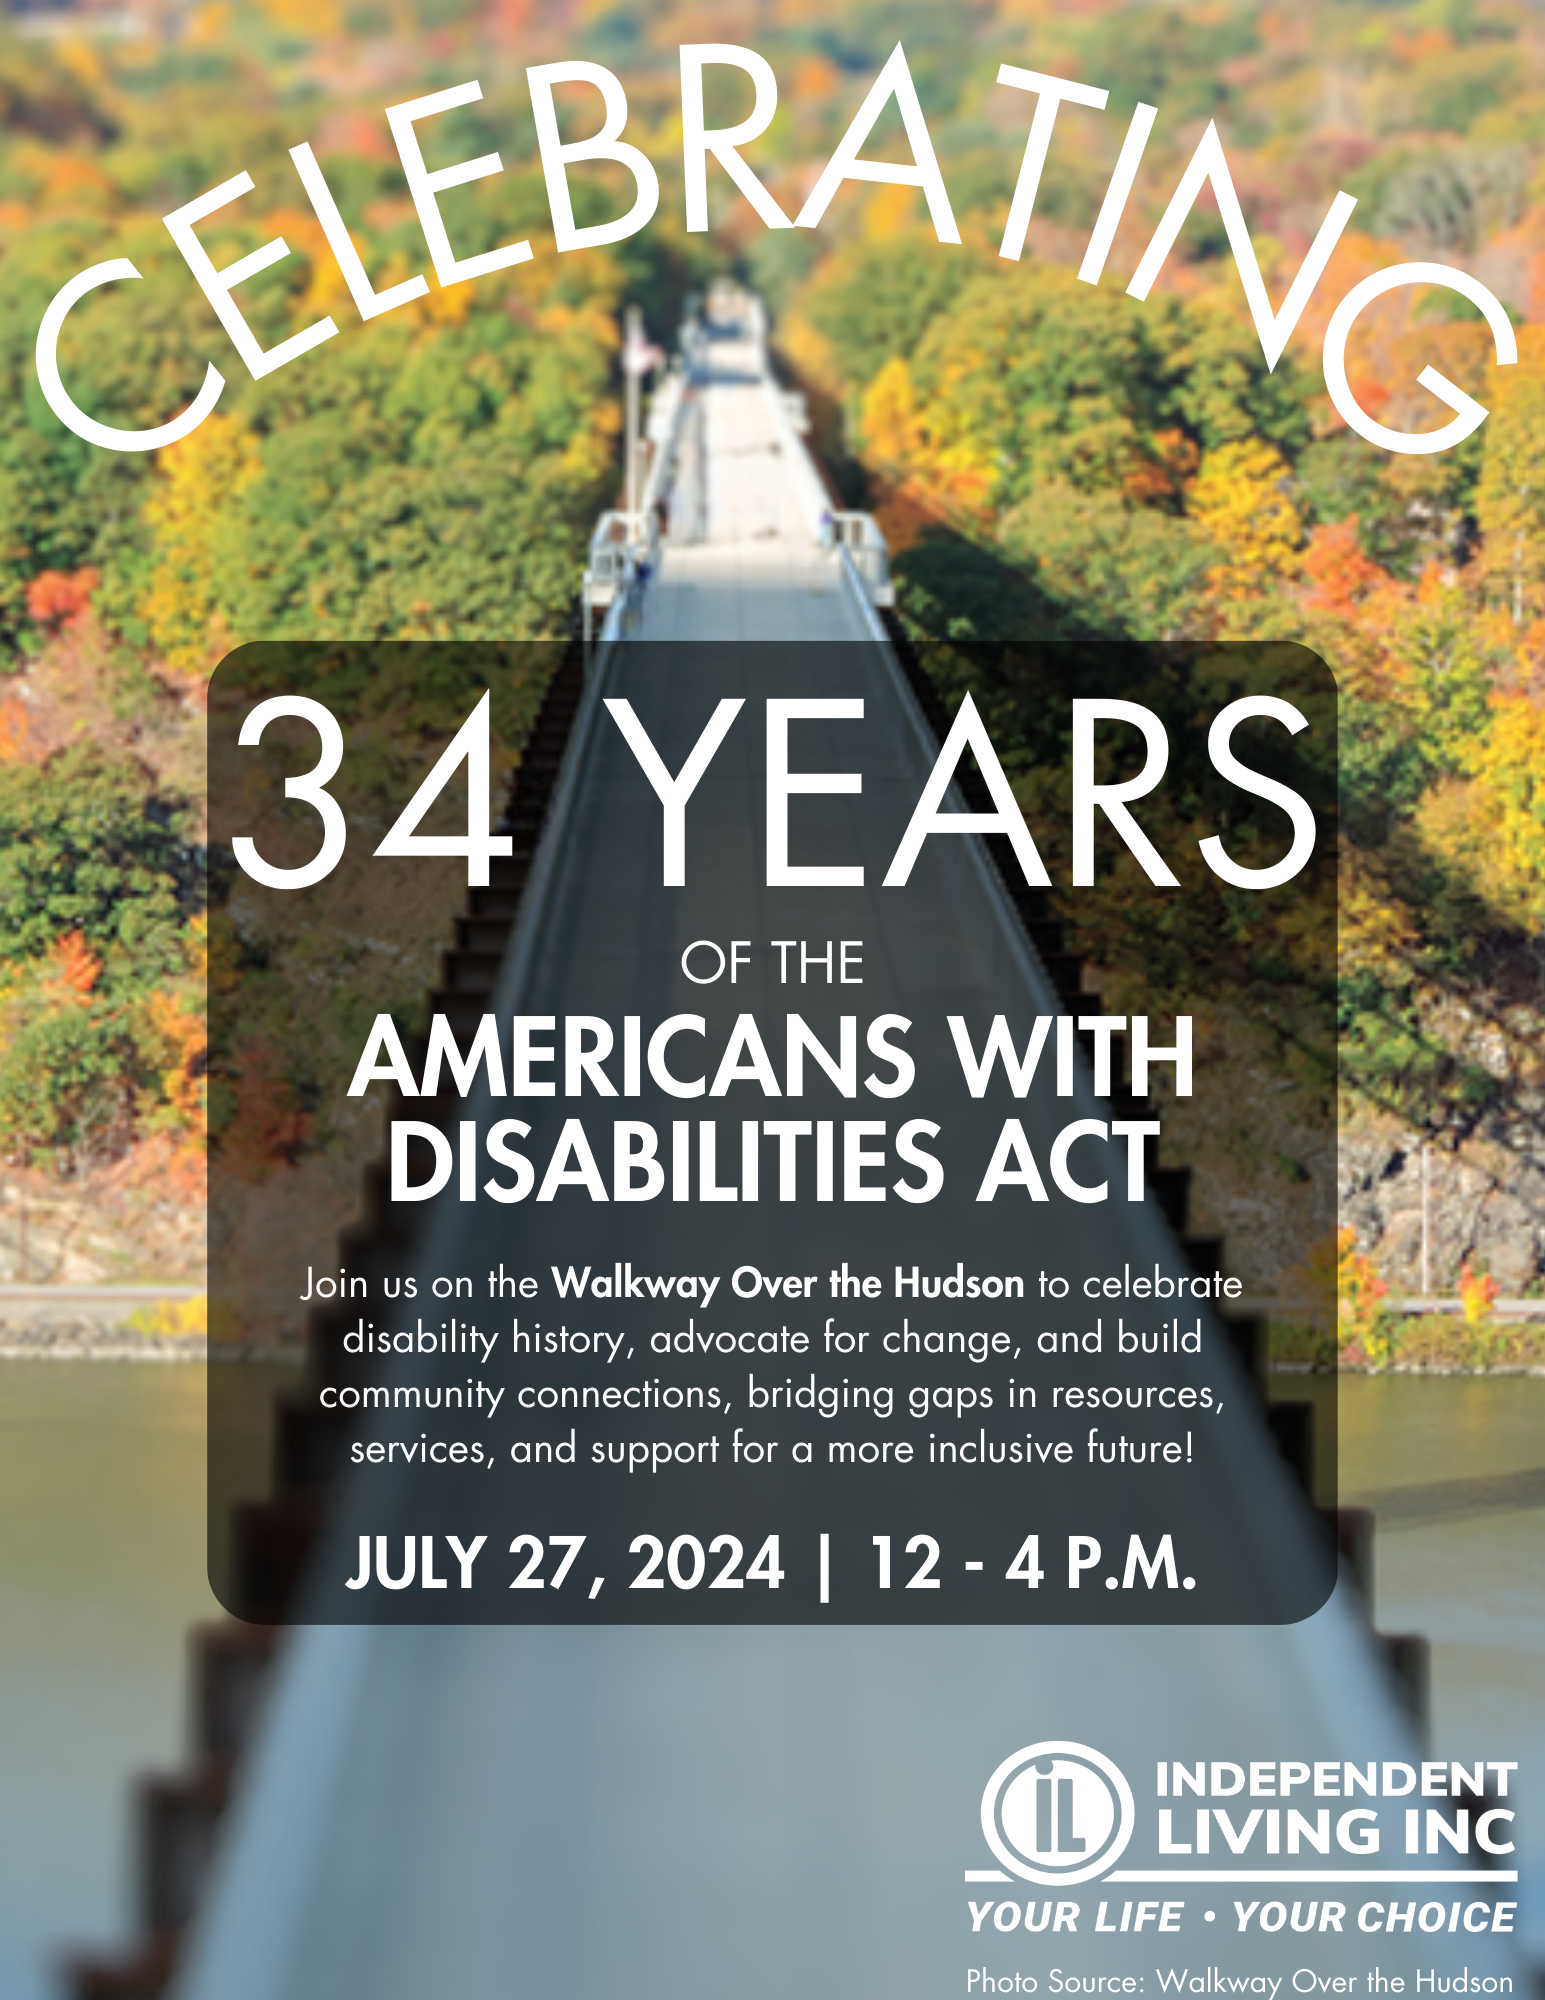 Birdseye view of the Walkway Over the Hudson, one end to the other. Over the image is text: Celebrating 34 Years of the Americans with Disabilities Act. Join us on the Walkway Over the Hudson to celebrate disability history, advocate for change, and build community connections, bridging gaps in resources, services, and support for a more inclusive future! July 27 12 - 4 pm